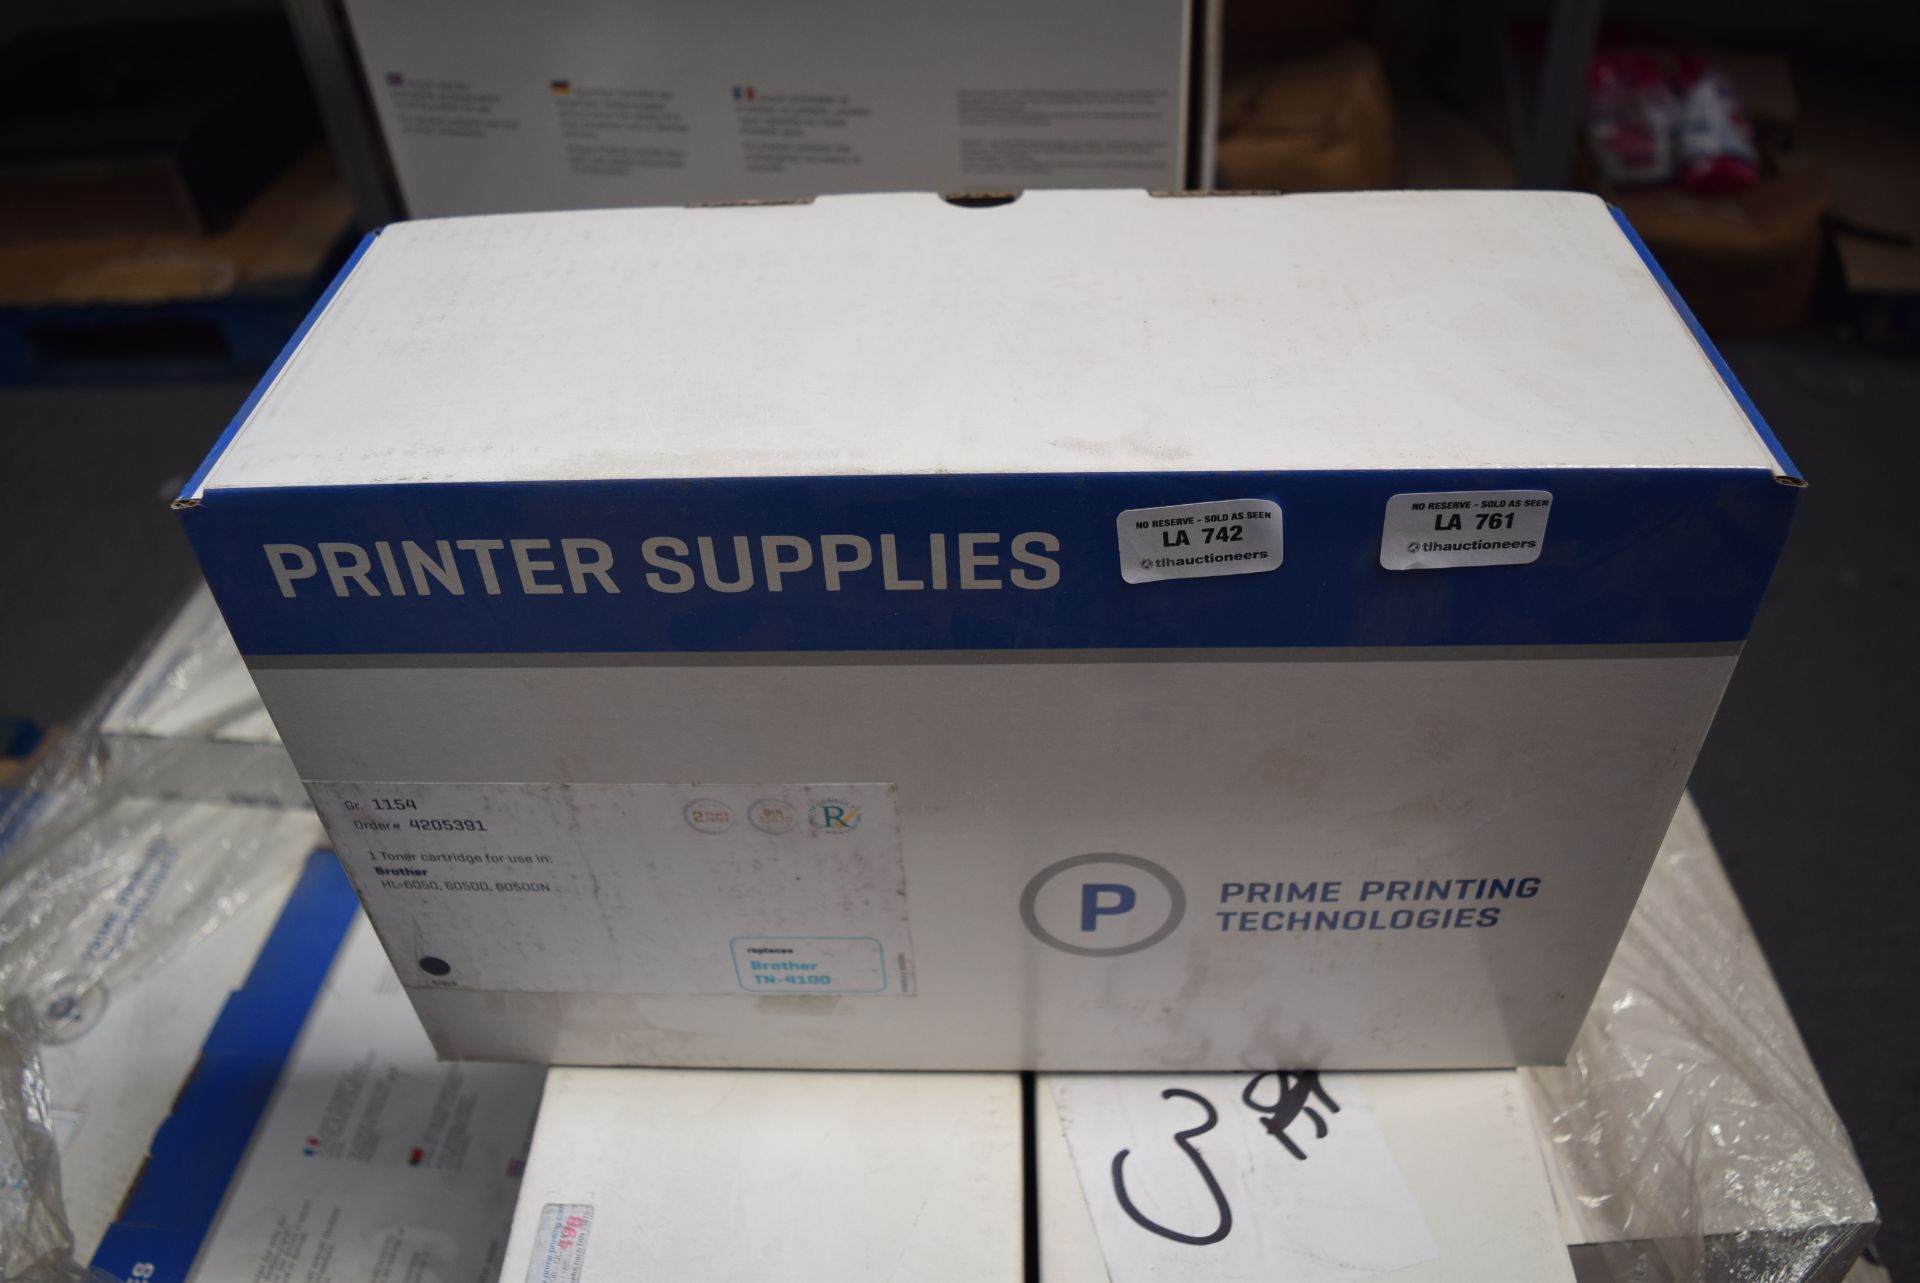 1 X BOXED BRAND NEW PRINTER SUPPLIES TONER CARTRIDGE FOR USE IN BROTHER HL-6050, 6050D, 6050DN